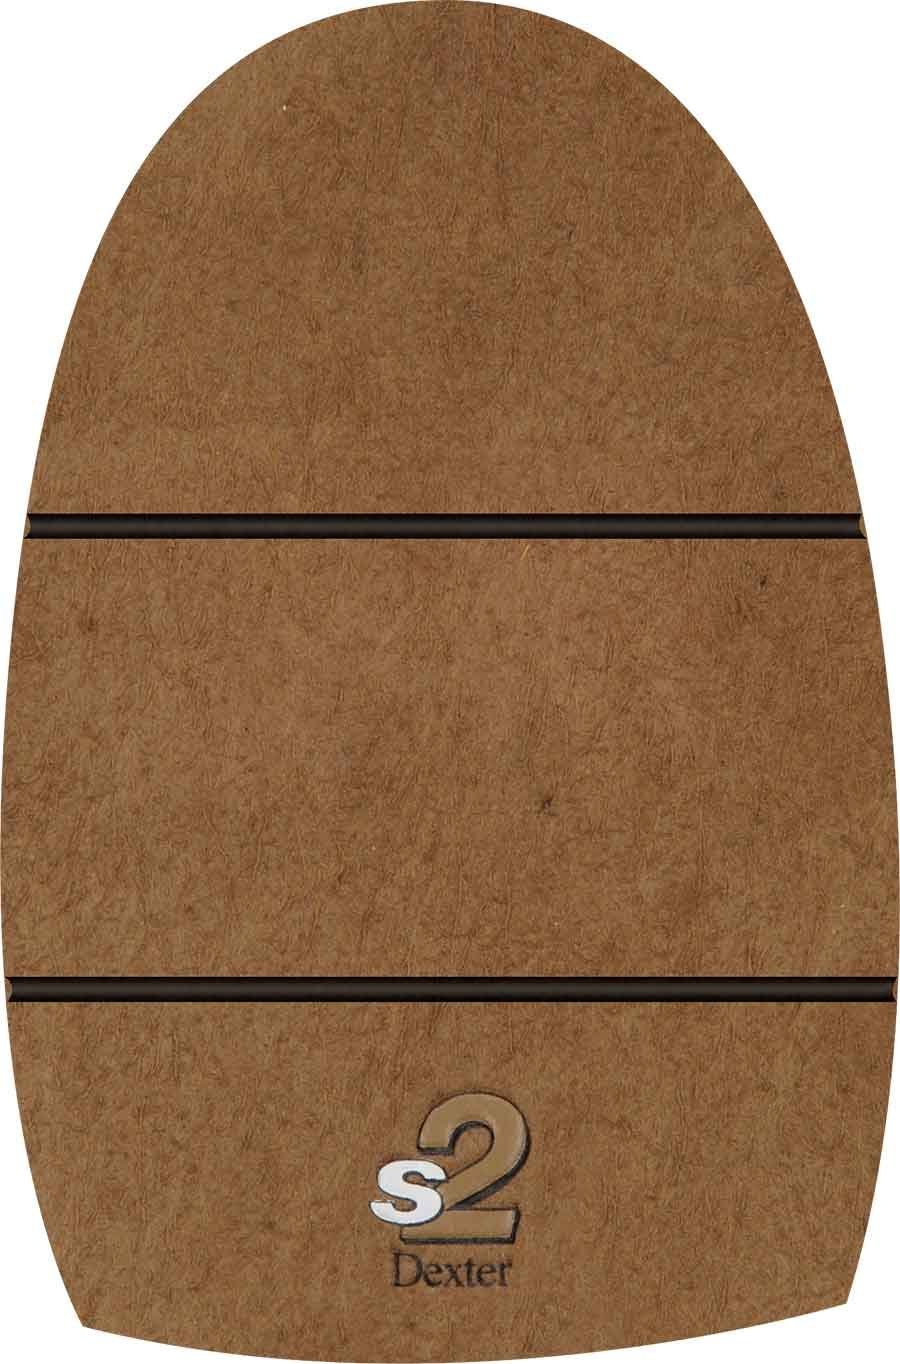 [AUSTRALIA] - Dexter Accessories - Specials - The 9 -Traction 2 PAD Large (Men's 11-12) Brown/A 